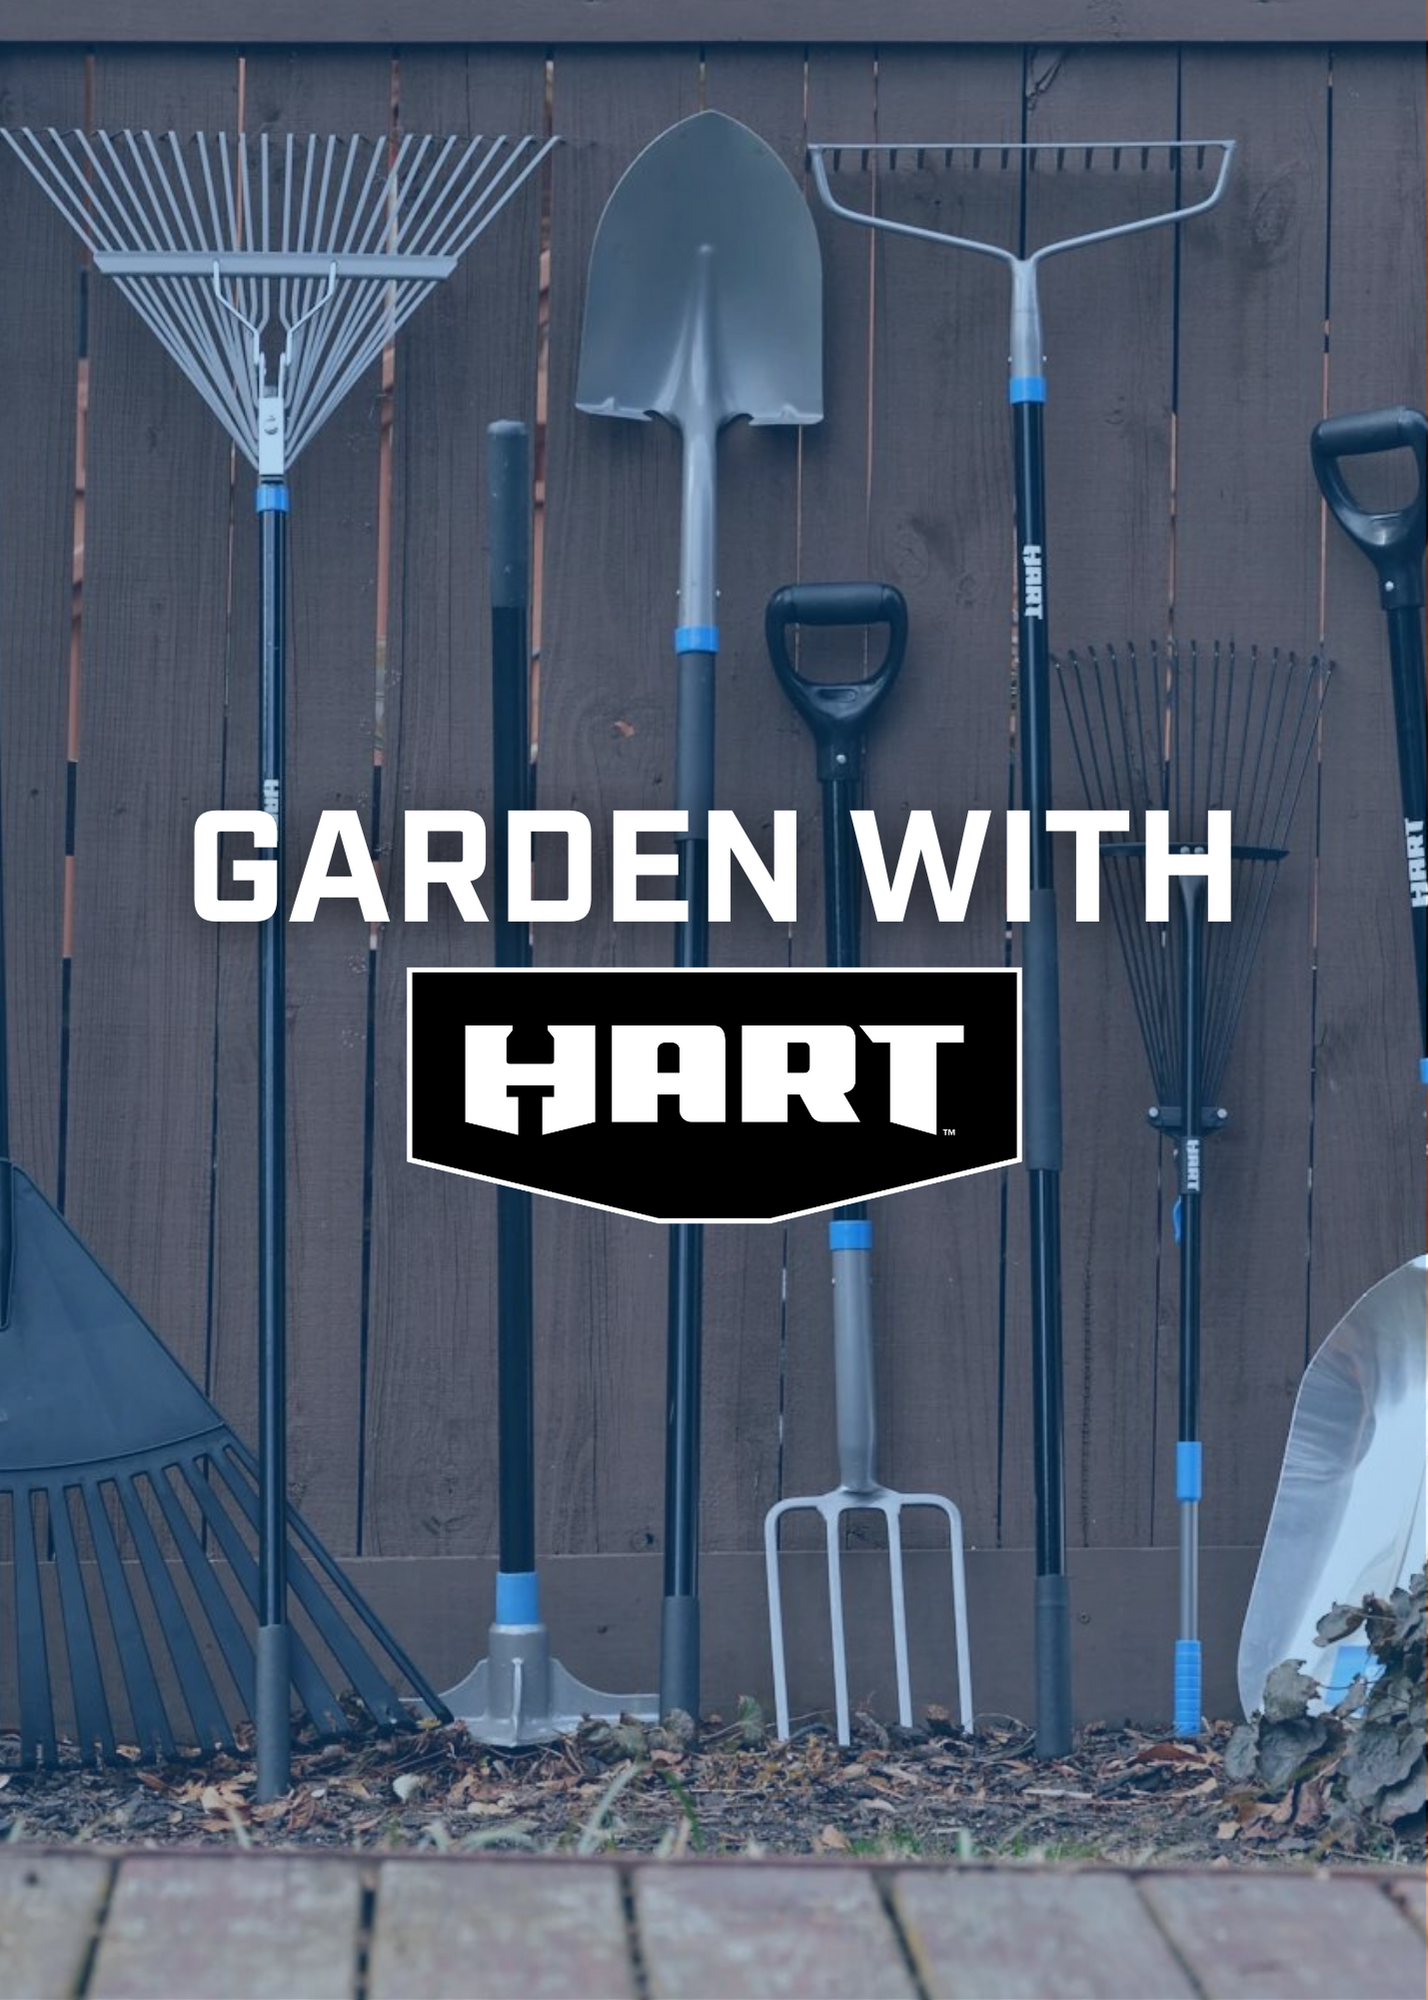 Garden with HART: A Guide to Projects, Plants & the Best Spring Yard